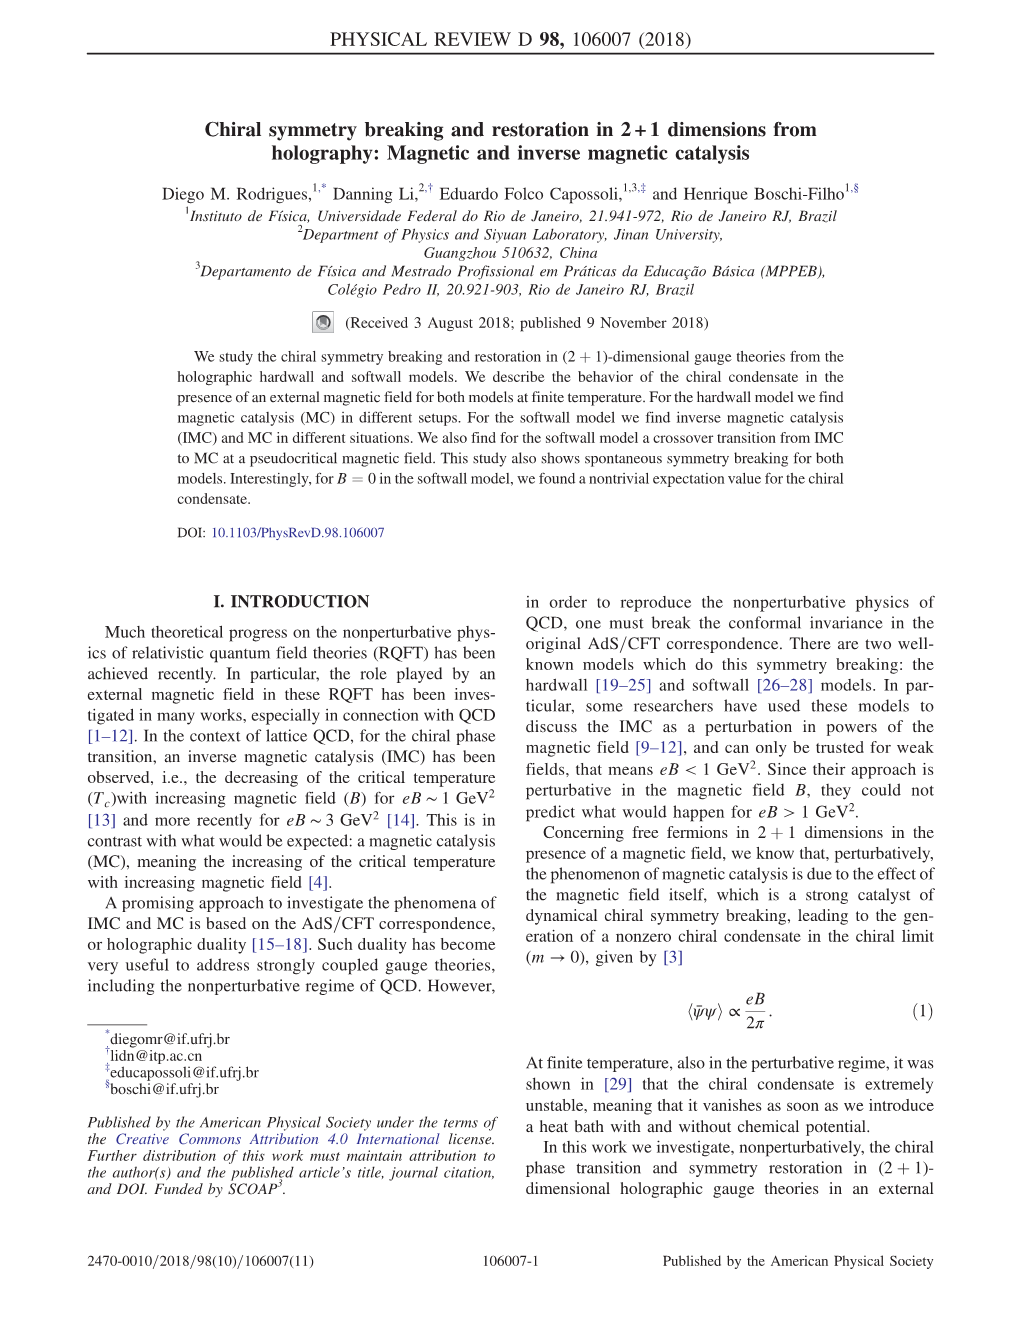 Chiral Symmetry Breaking and Restoration in 2+1 Dimensions From